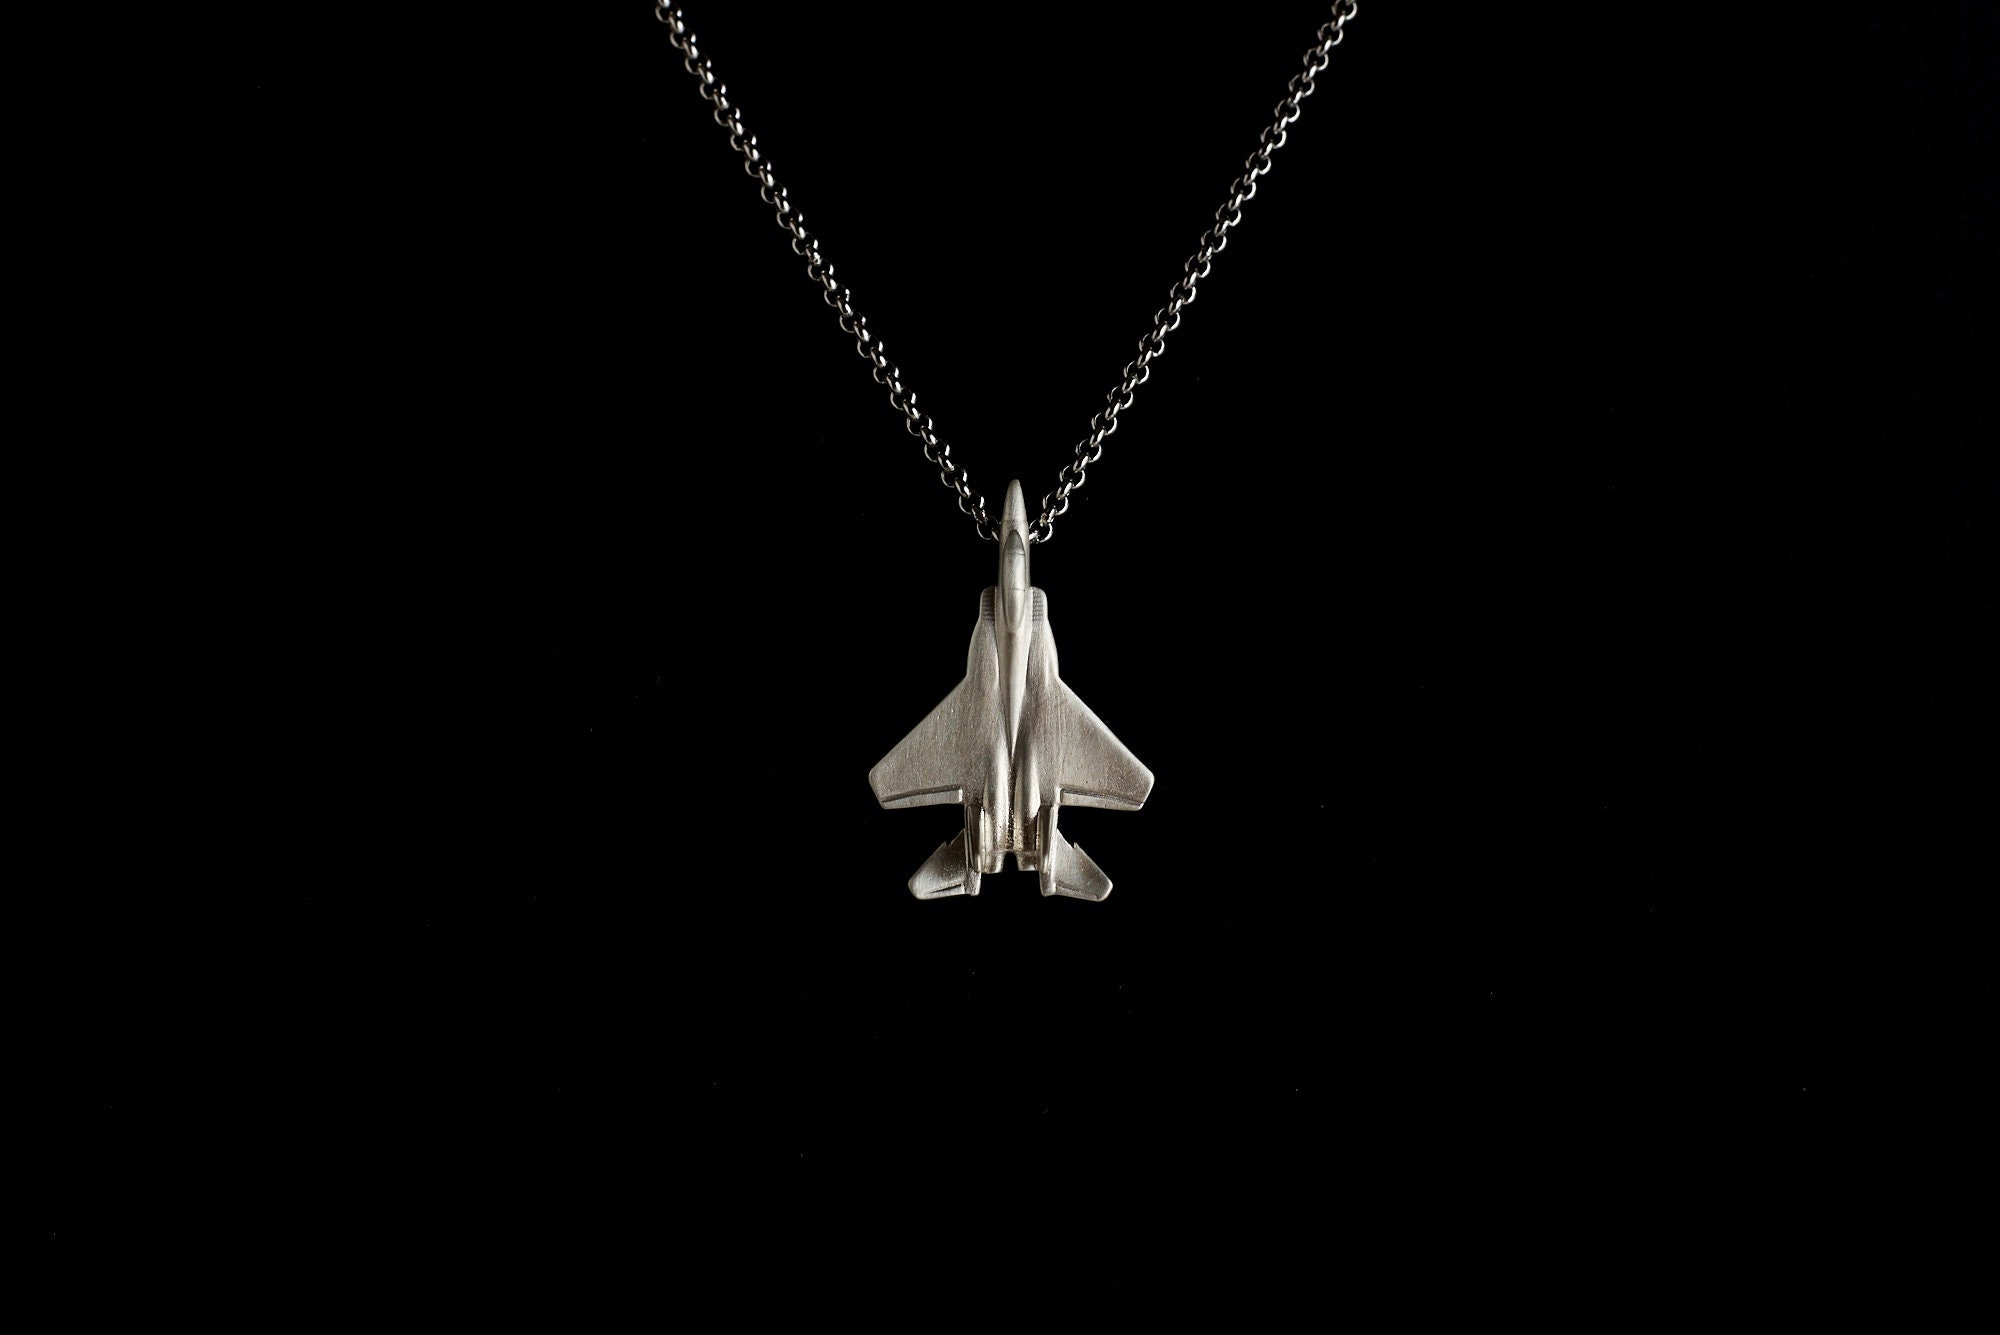 Airplane Necklace 15